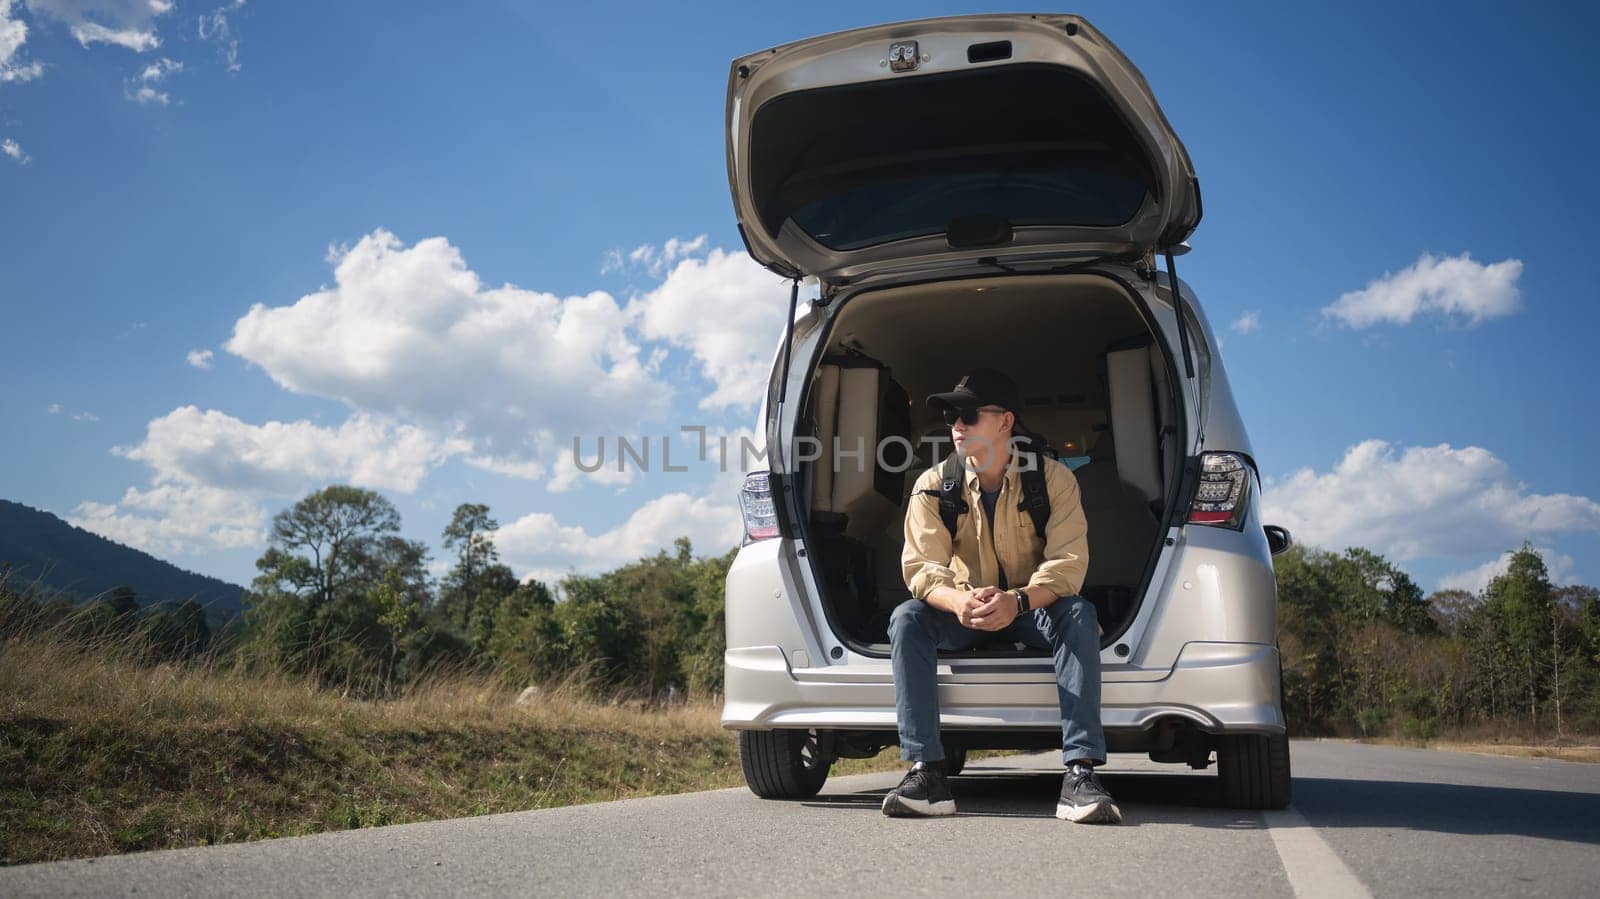 Male traveler on a road trip, sitting on the open trunk of his car against blue sky and white cloud.